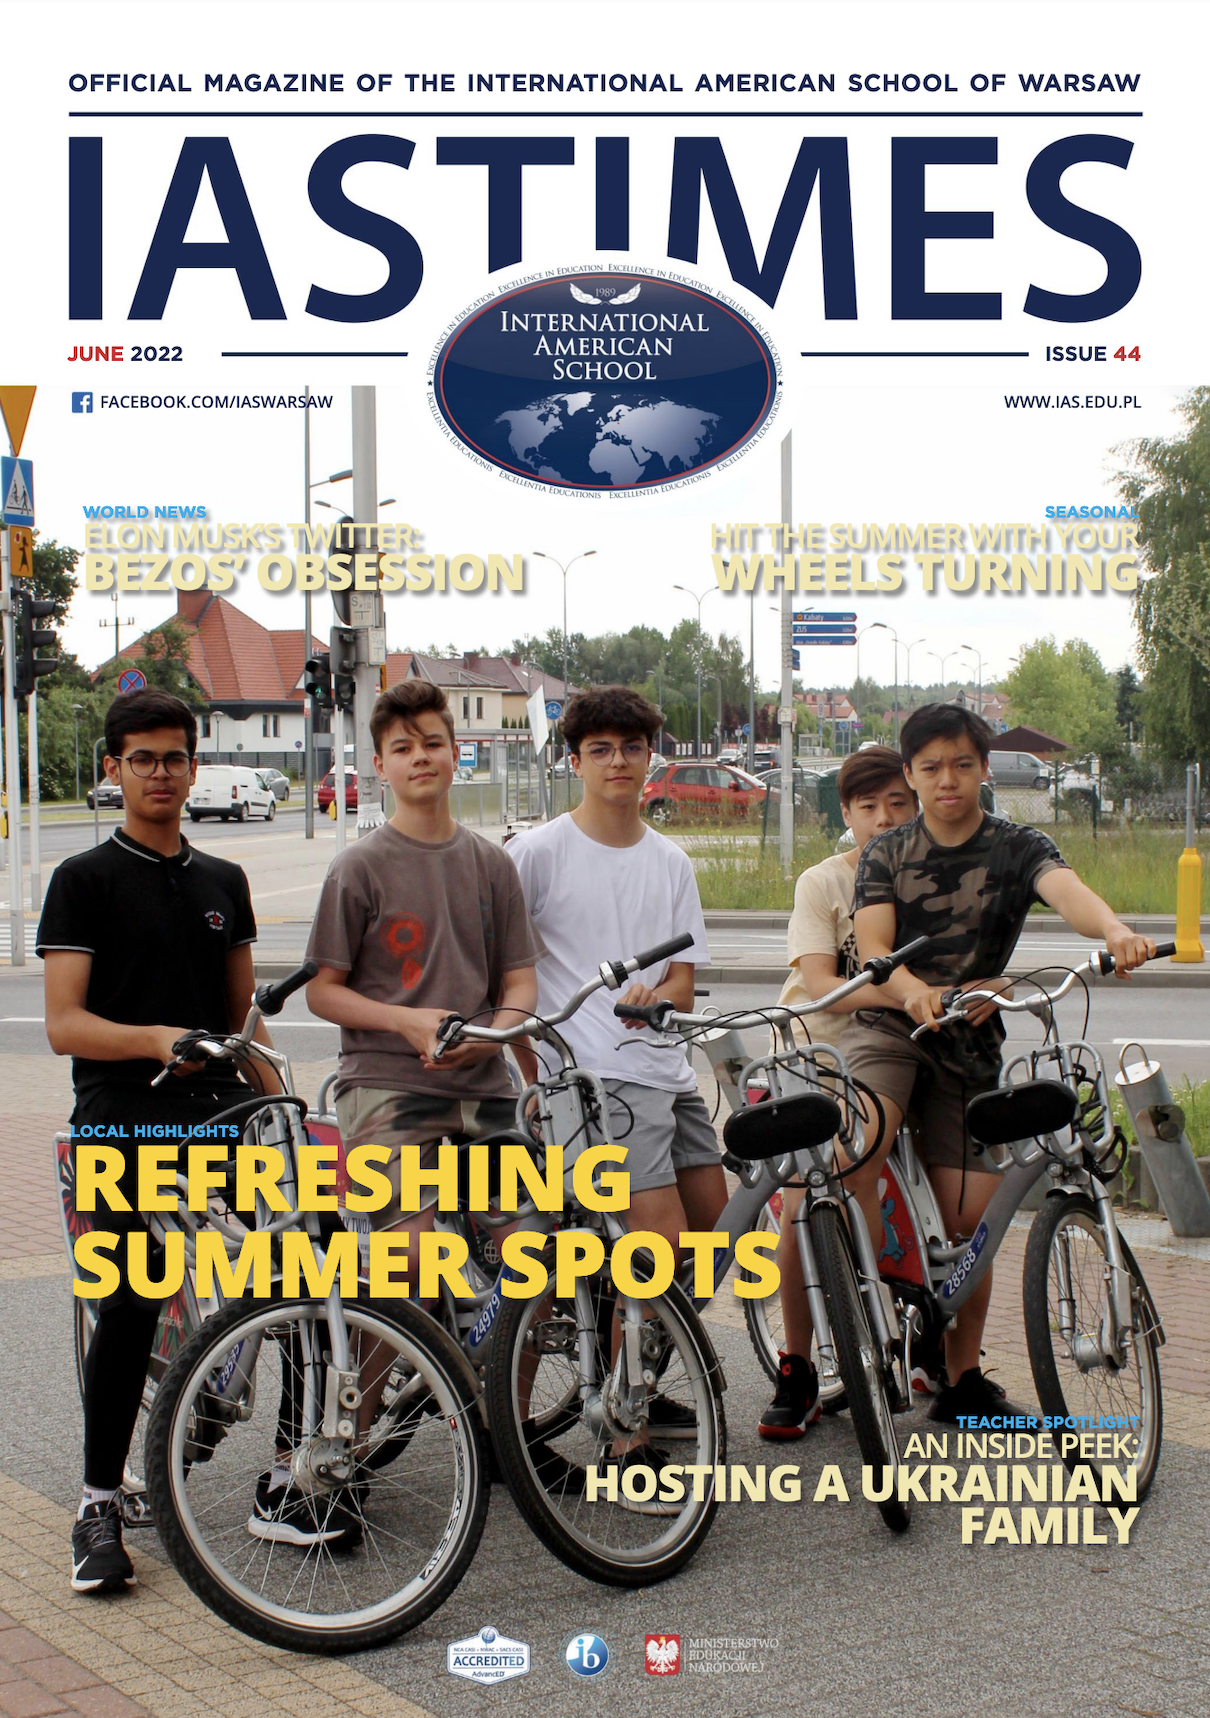 IAS Times Issue no. 44 - Digital Version - out now